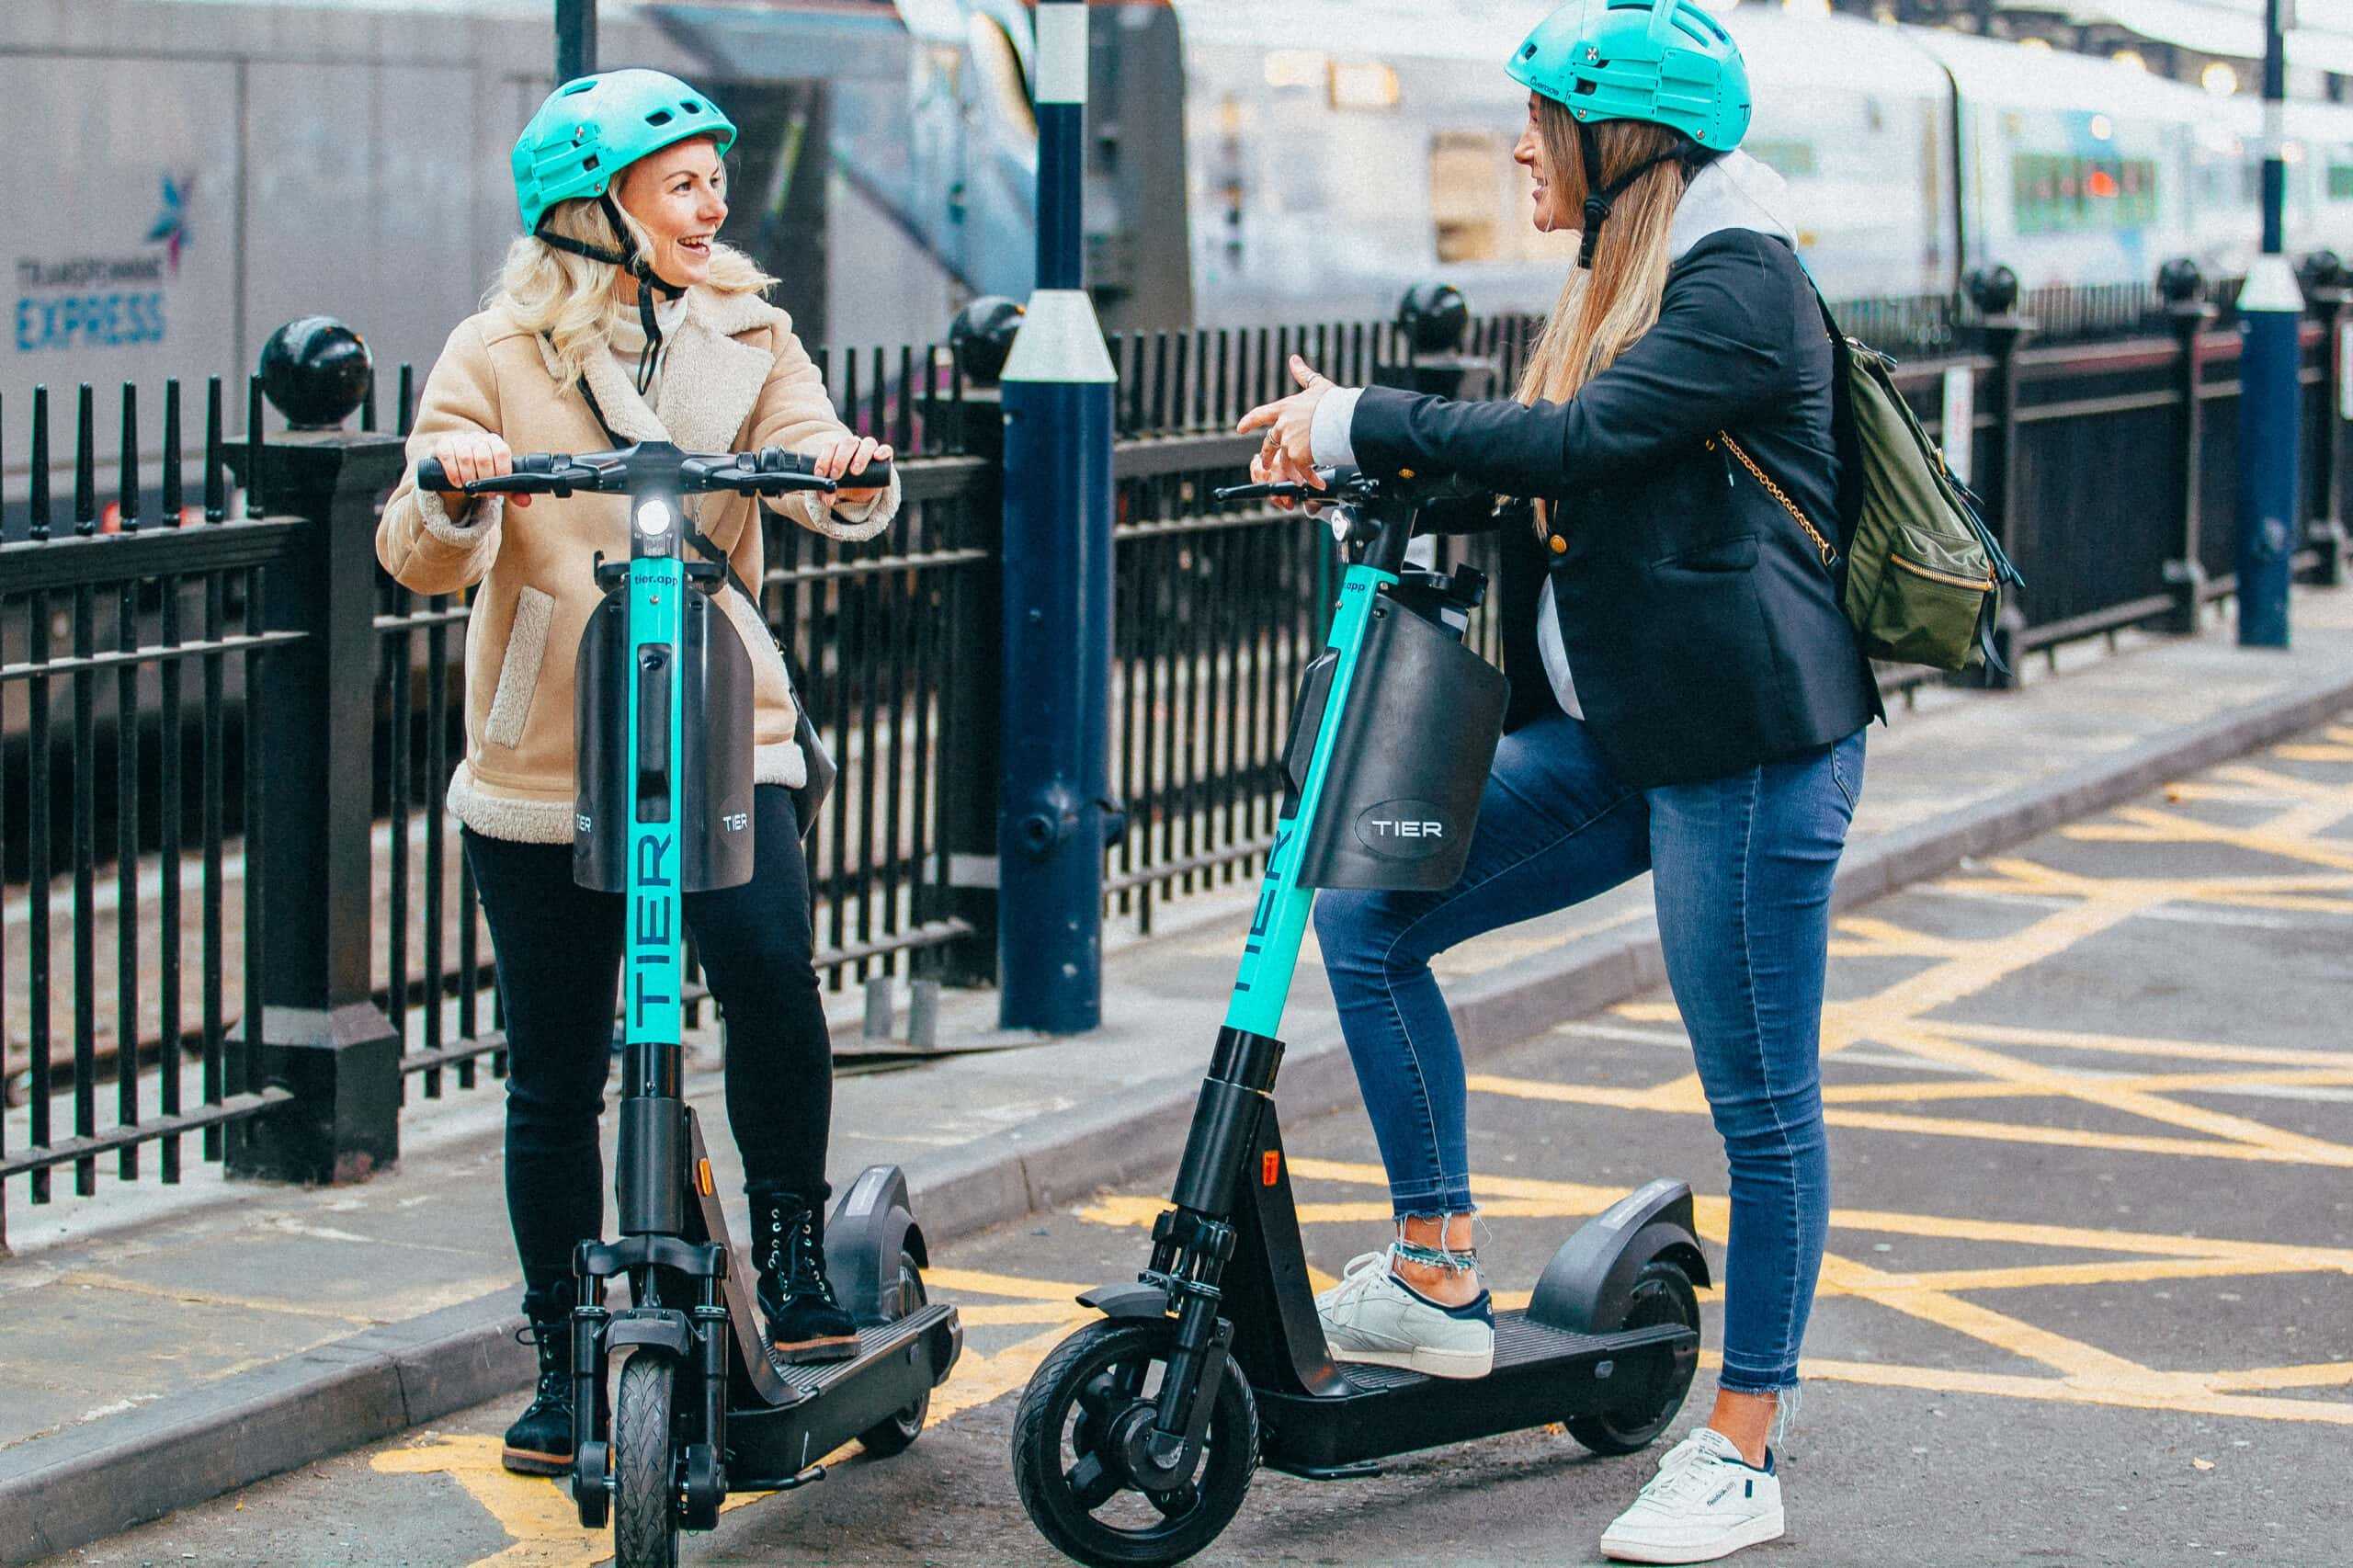 aktivering ulykke Supersonic hastighed TIER introduces new pricing model for London to discourage reckless riding  and save people money | TIER Blog